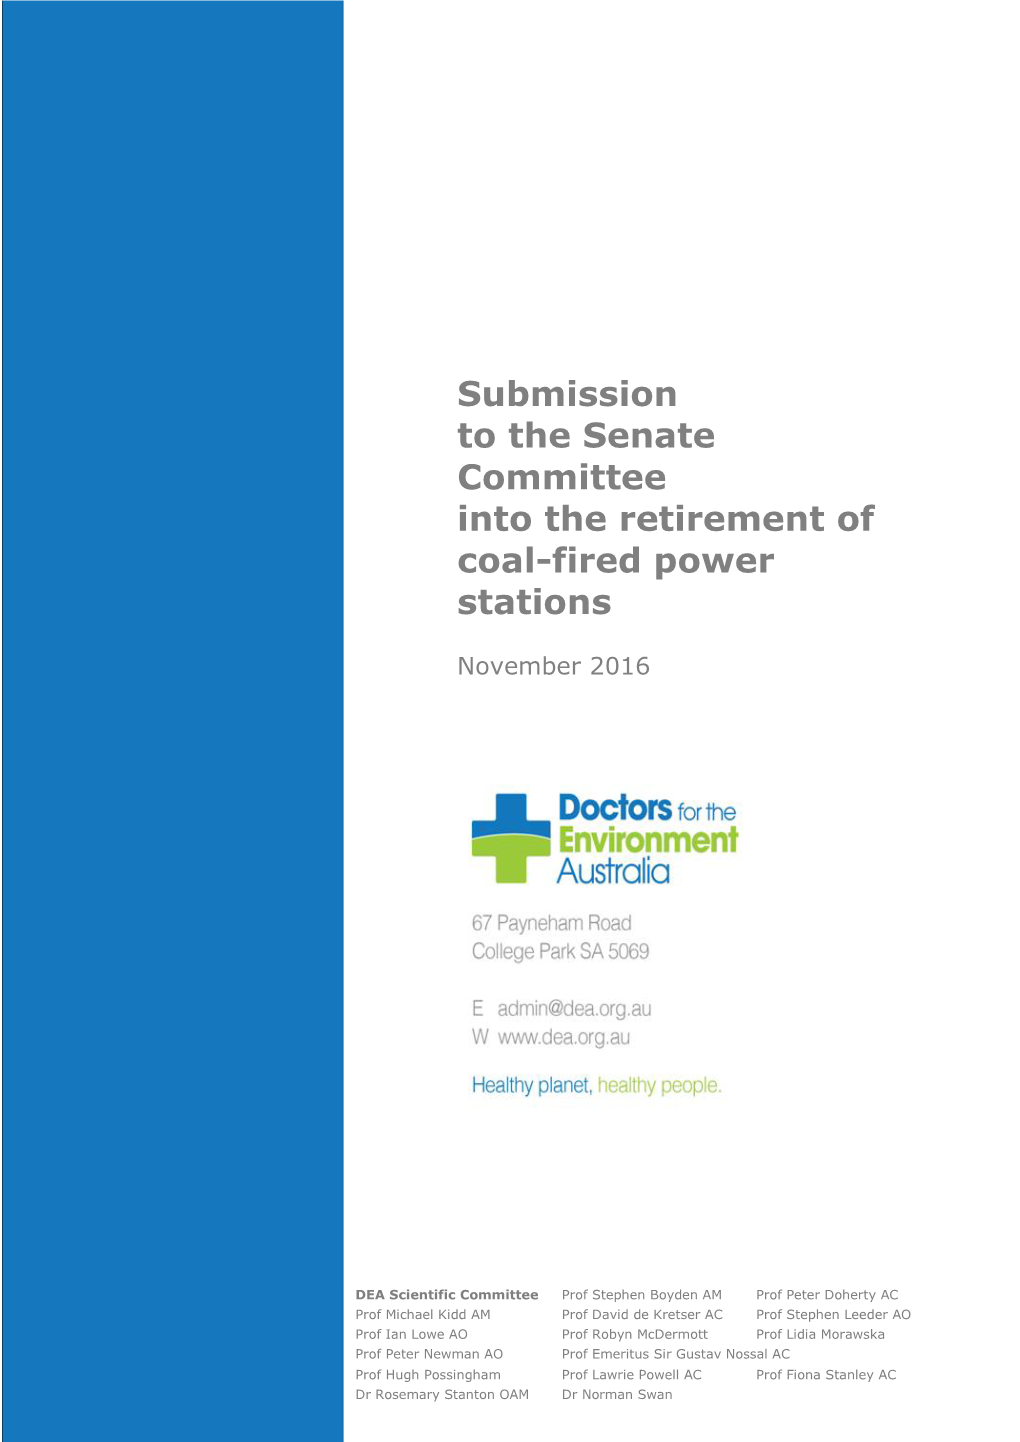 Submission to the Senate Committee Into the Retirement of Coal-Fired